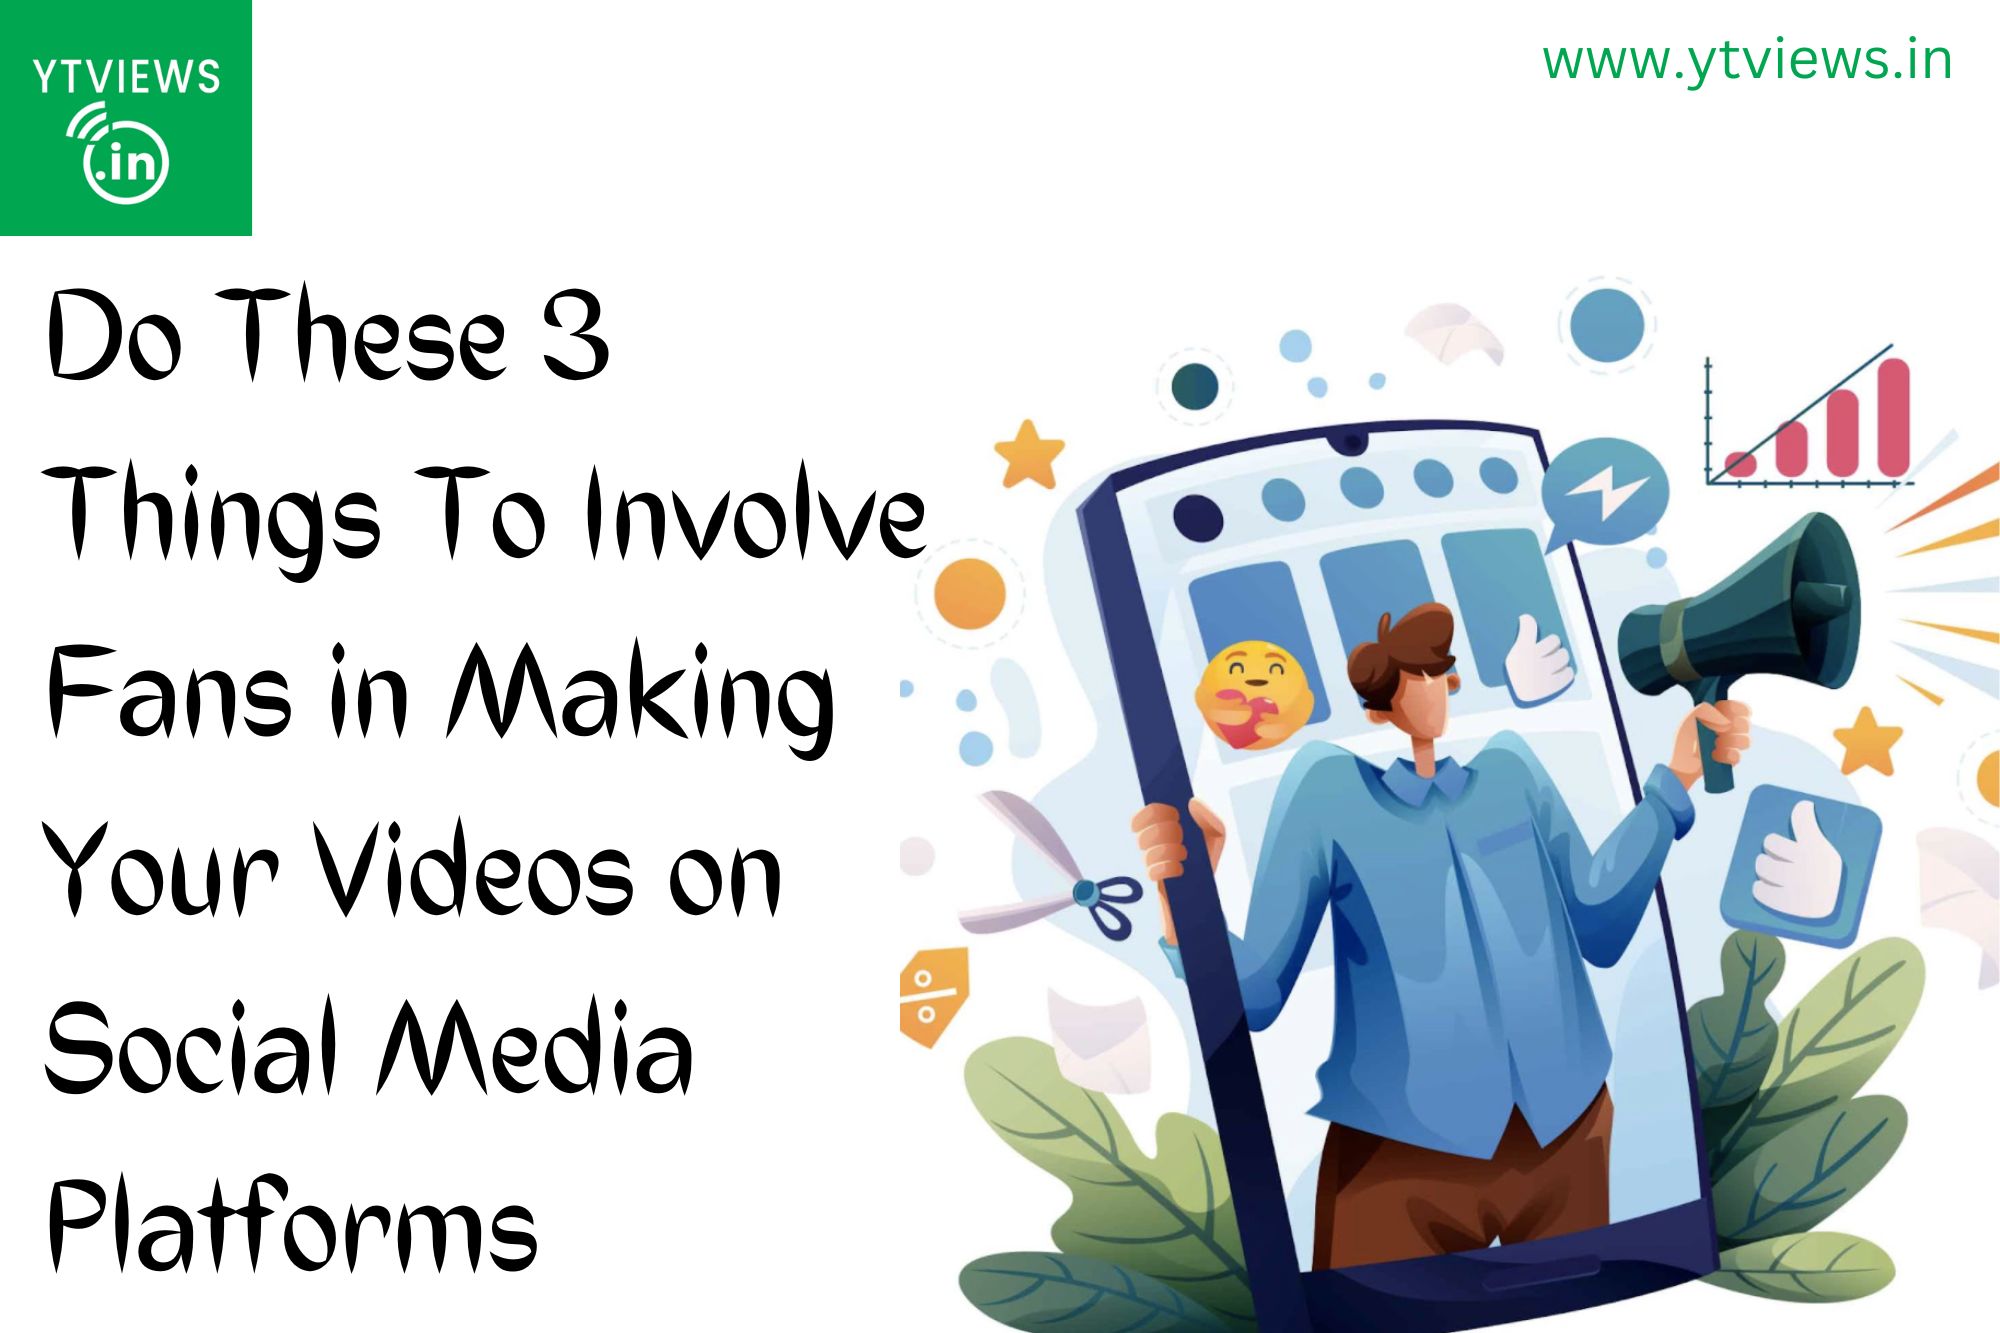 Do these 3 things to involve fans in making your videos on social media platforms